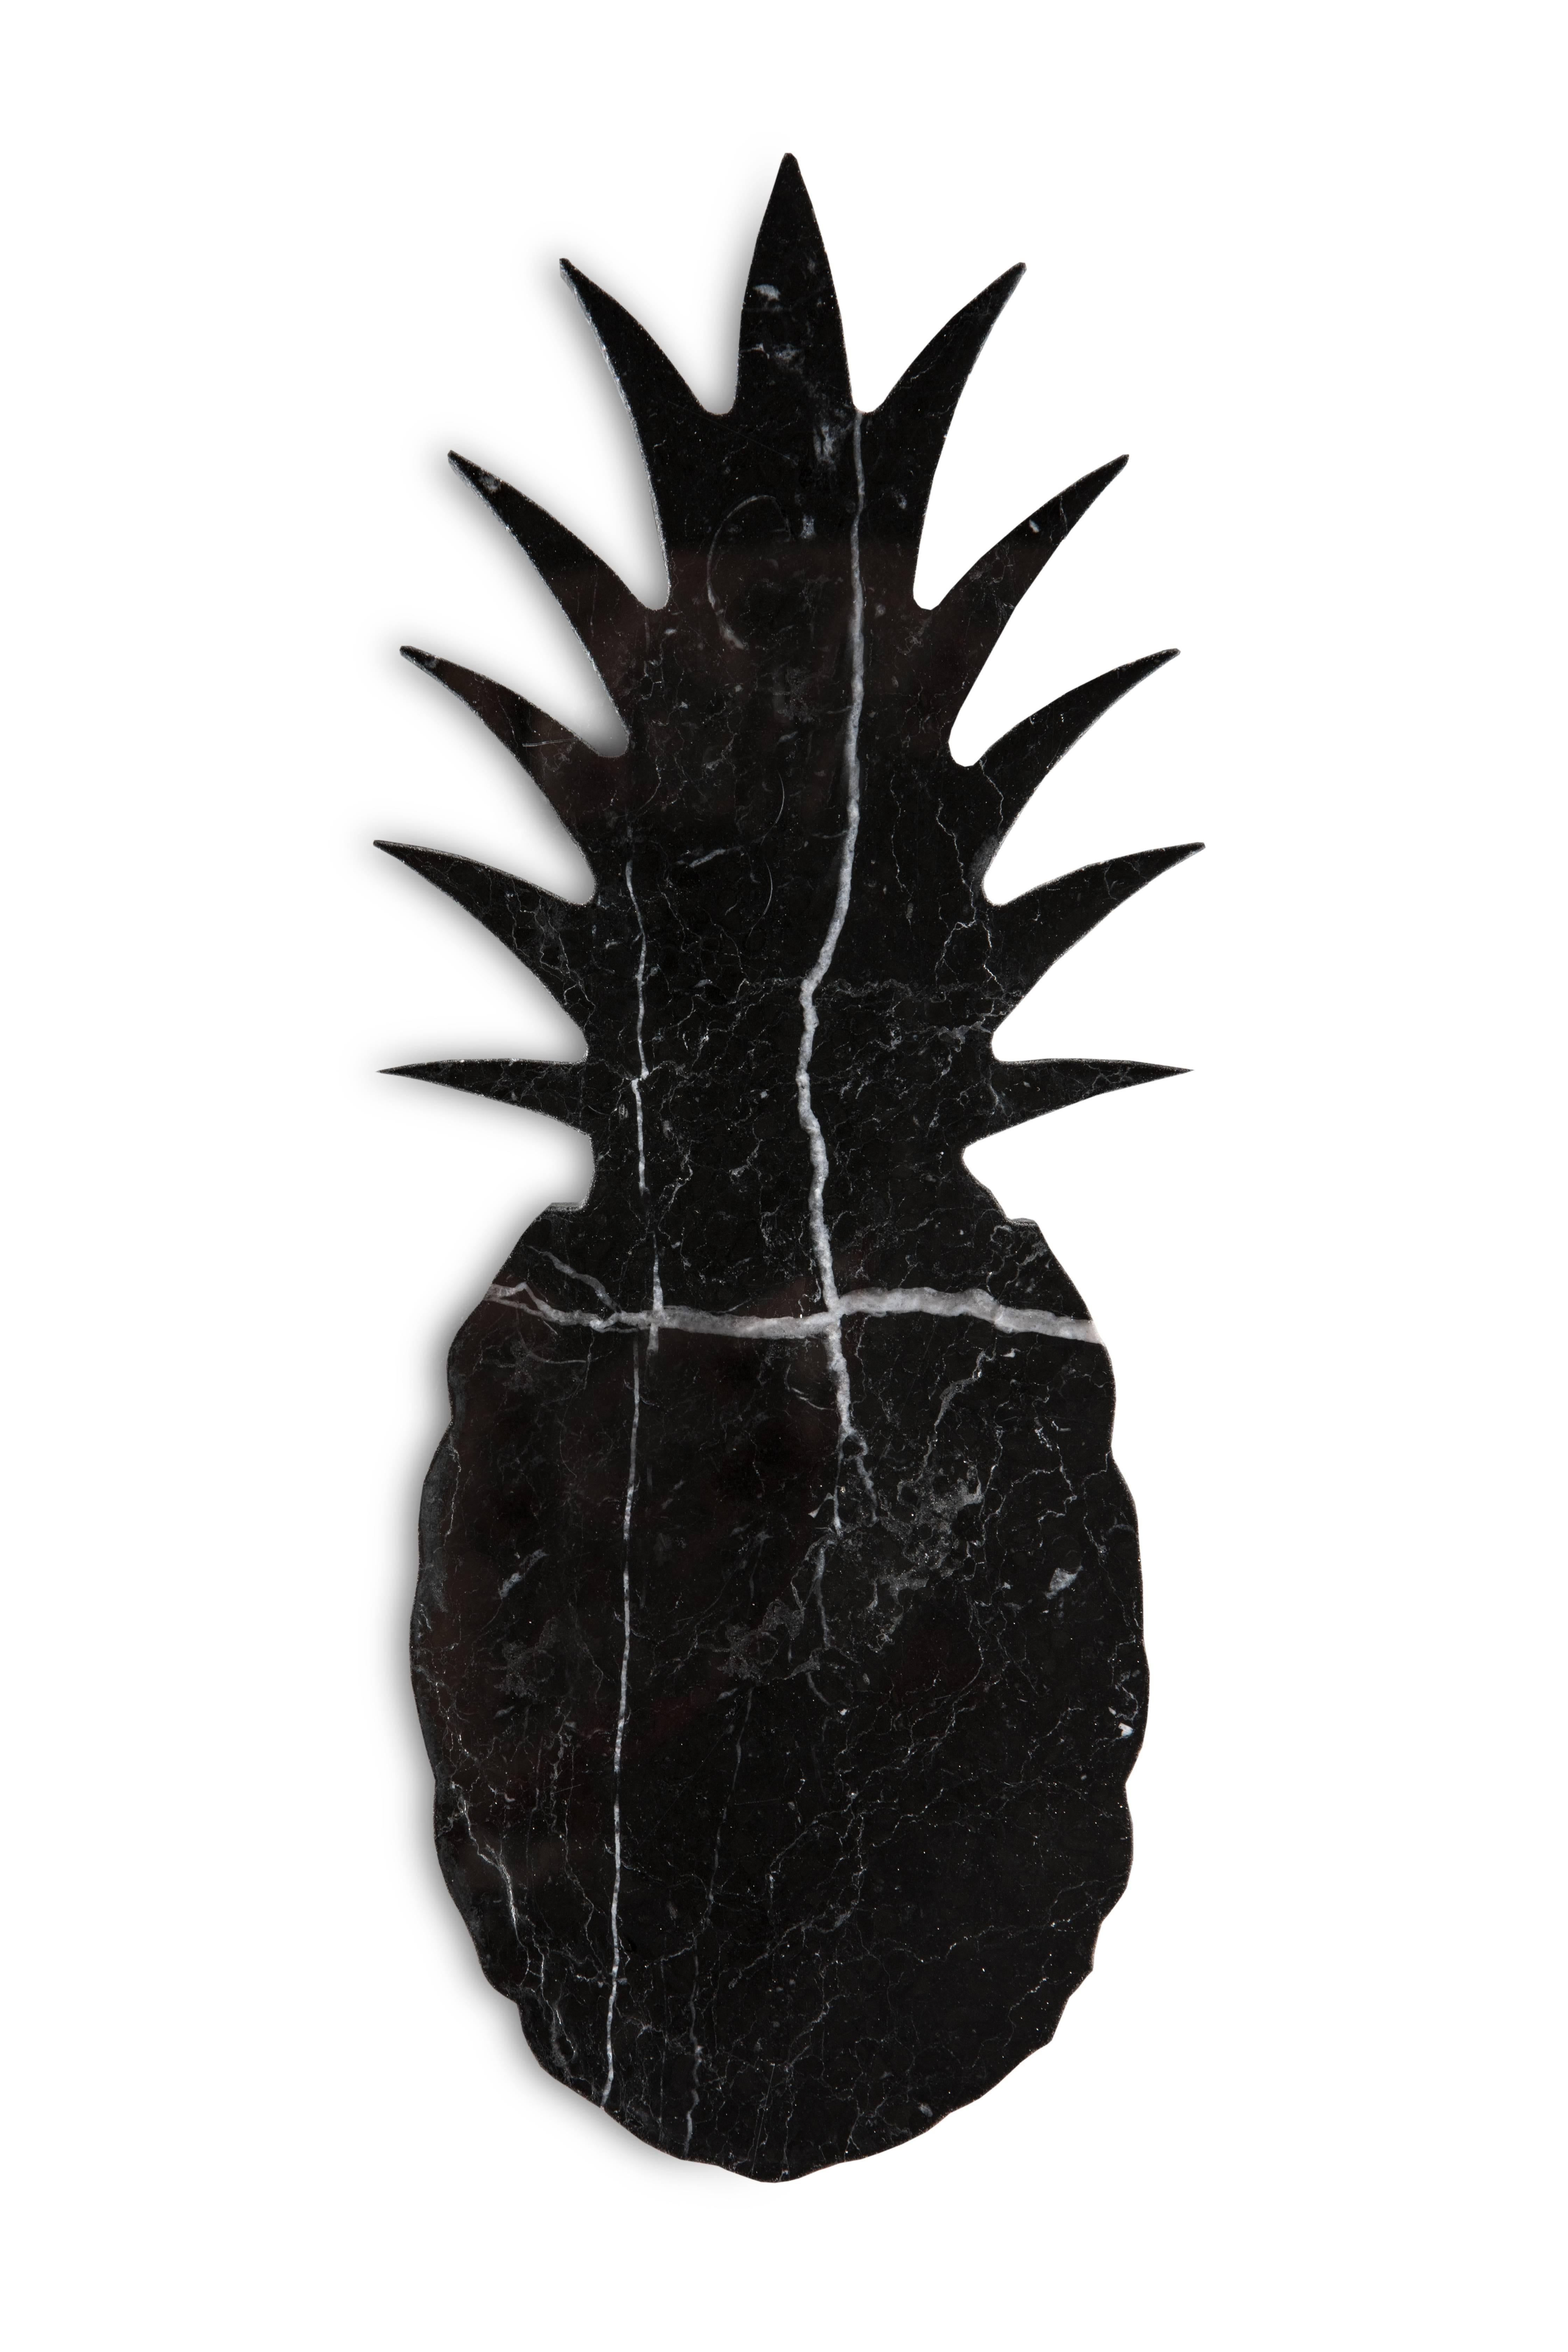 Small black Marquina marble paperweight with pineapple shape. Each piece is in a way unique (every marble block is different in veins and shades) and handmade by Italian artisans specialized over generations in processing marble. Slight variations